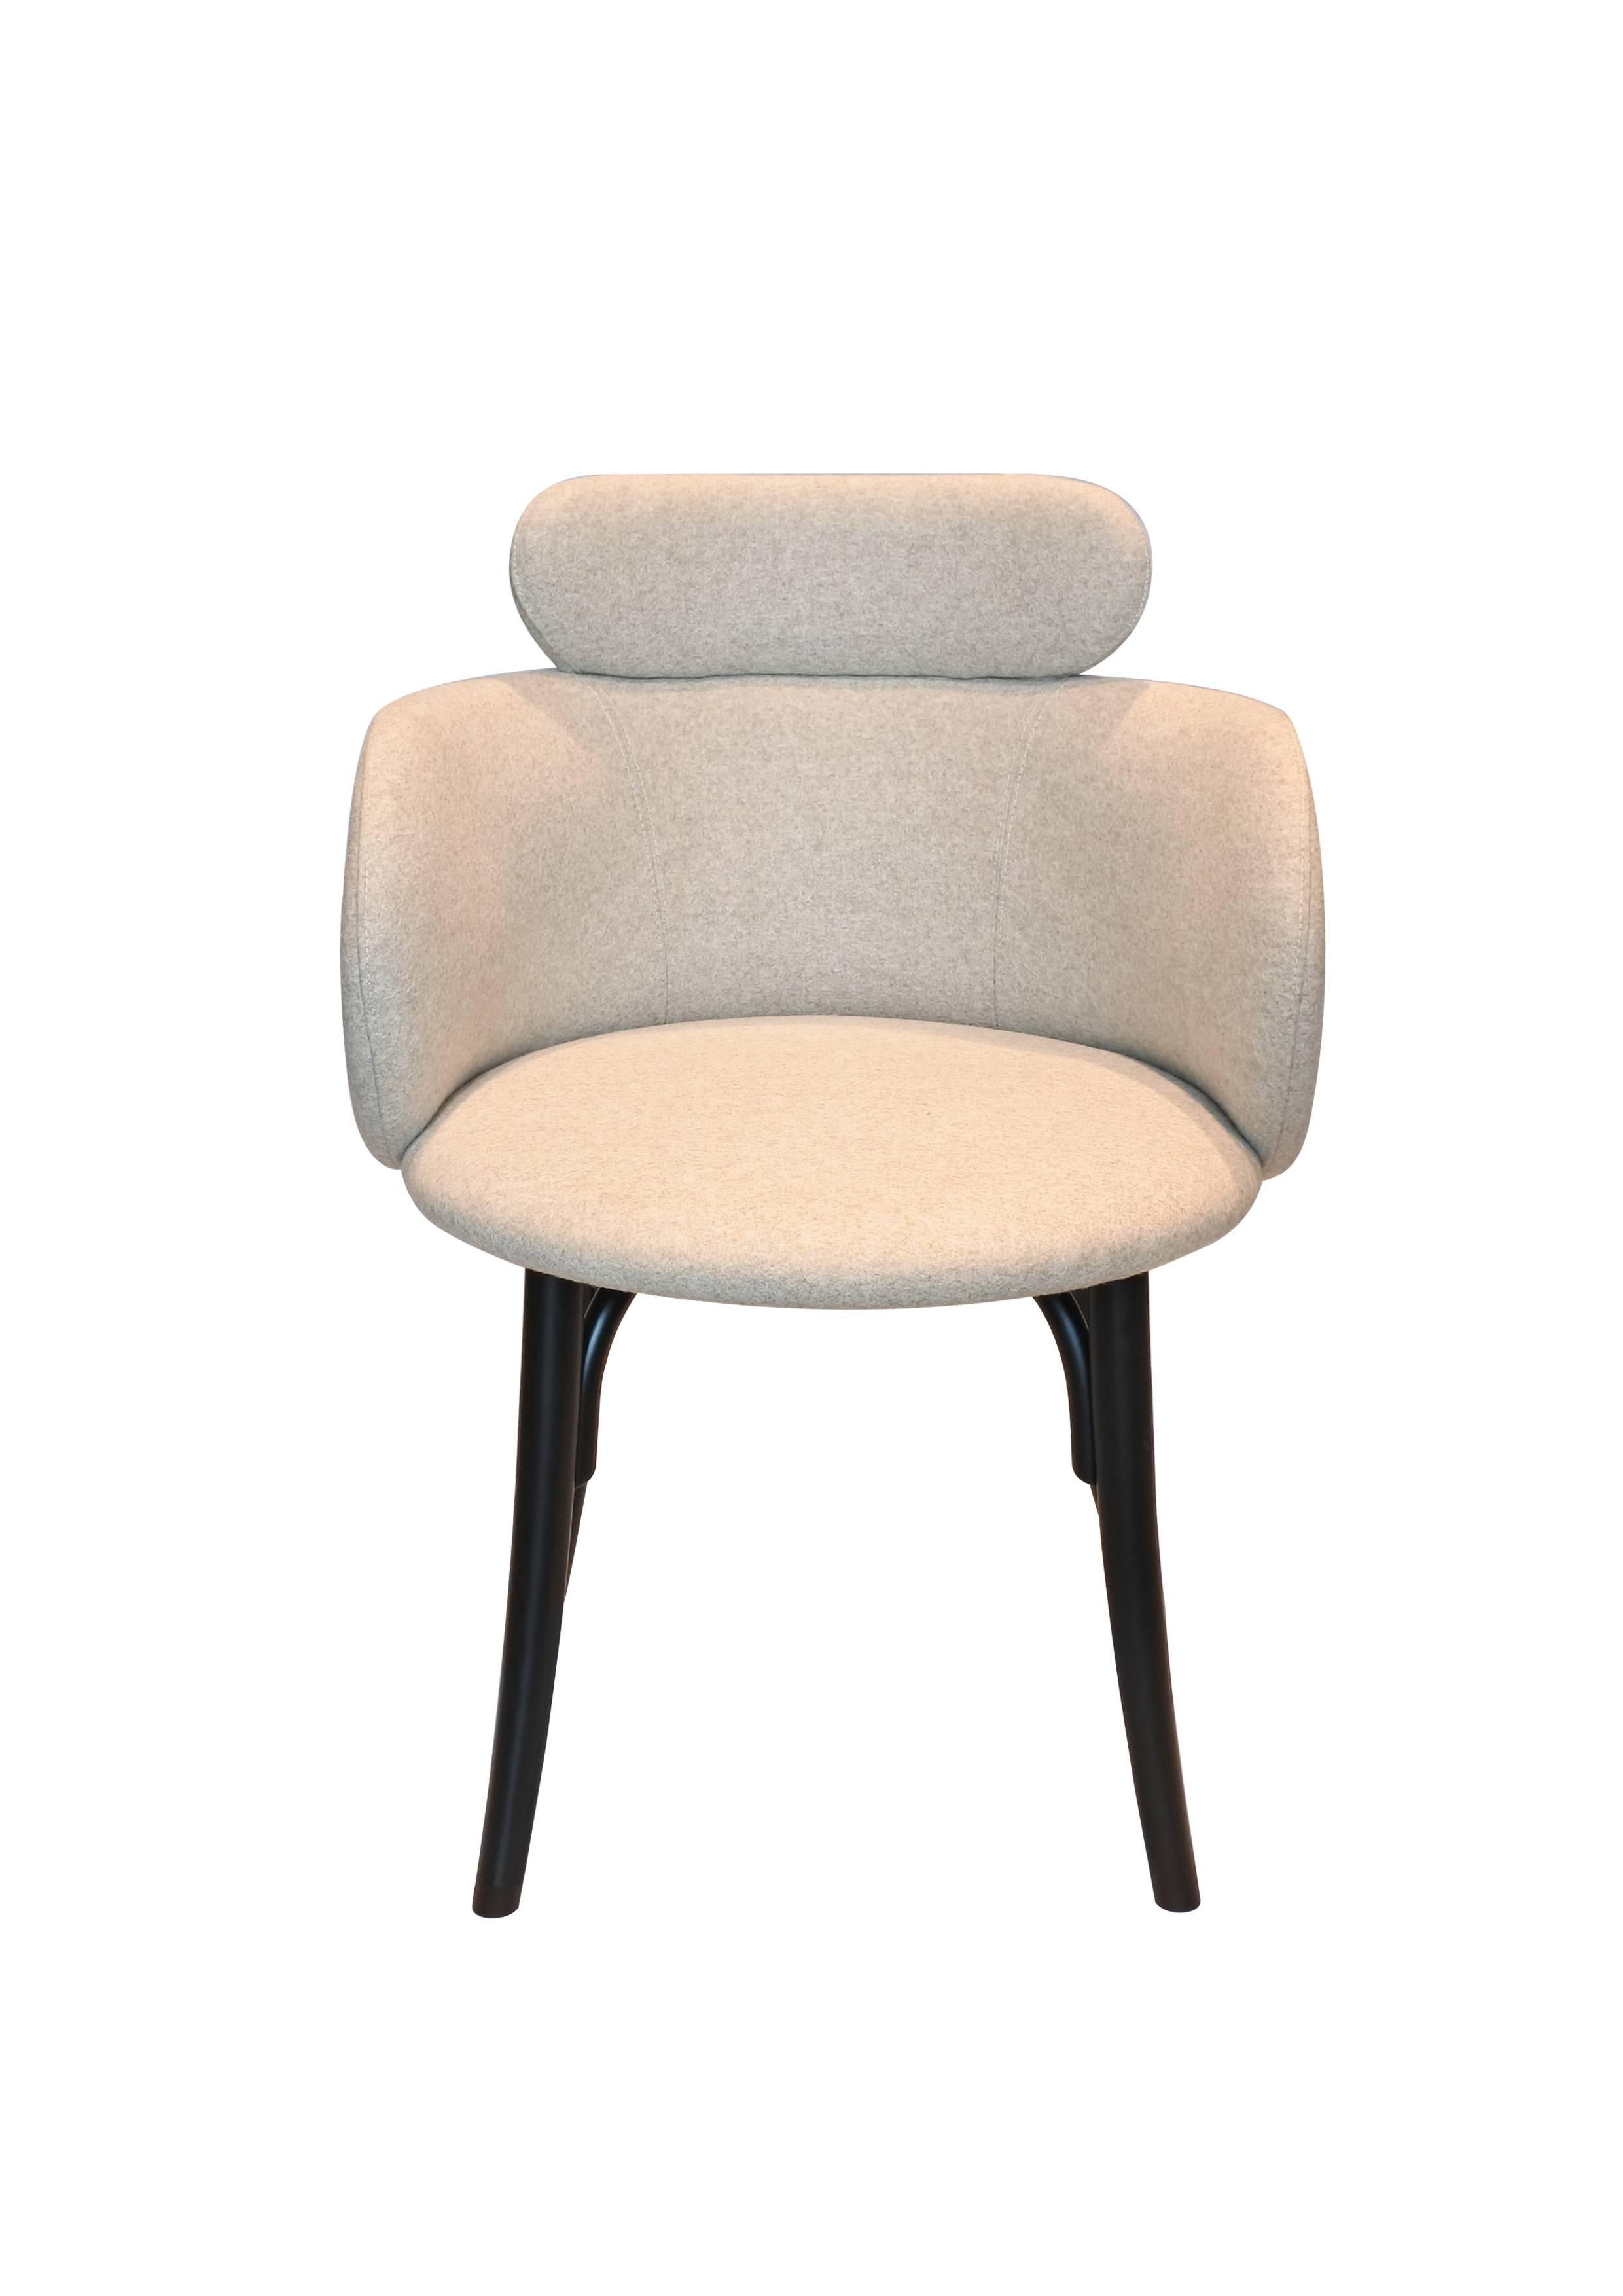 Contemporary Malit Armchair by Gordon Guillaumier & GTV For Sale